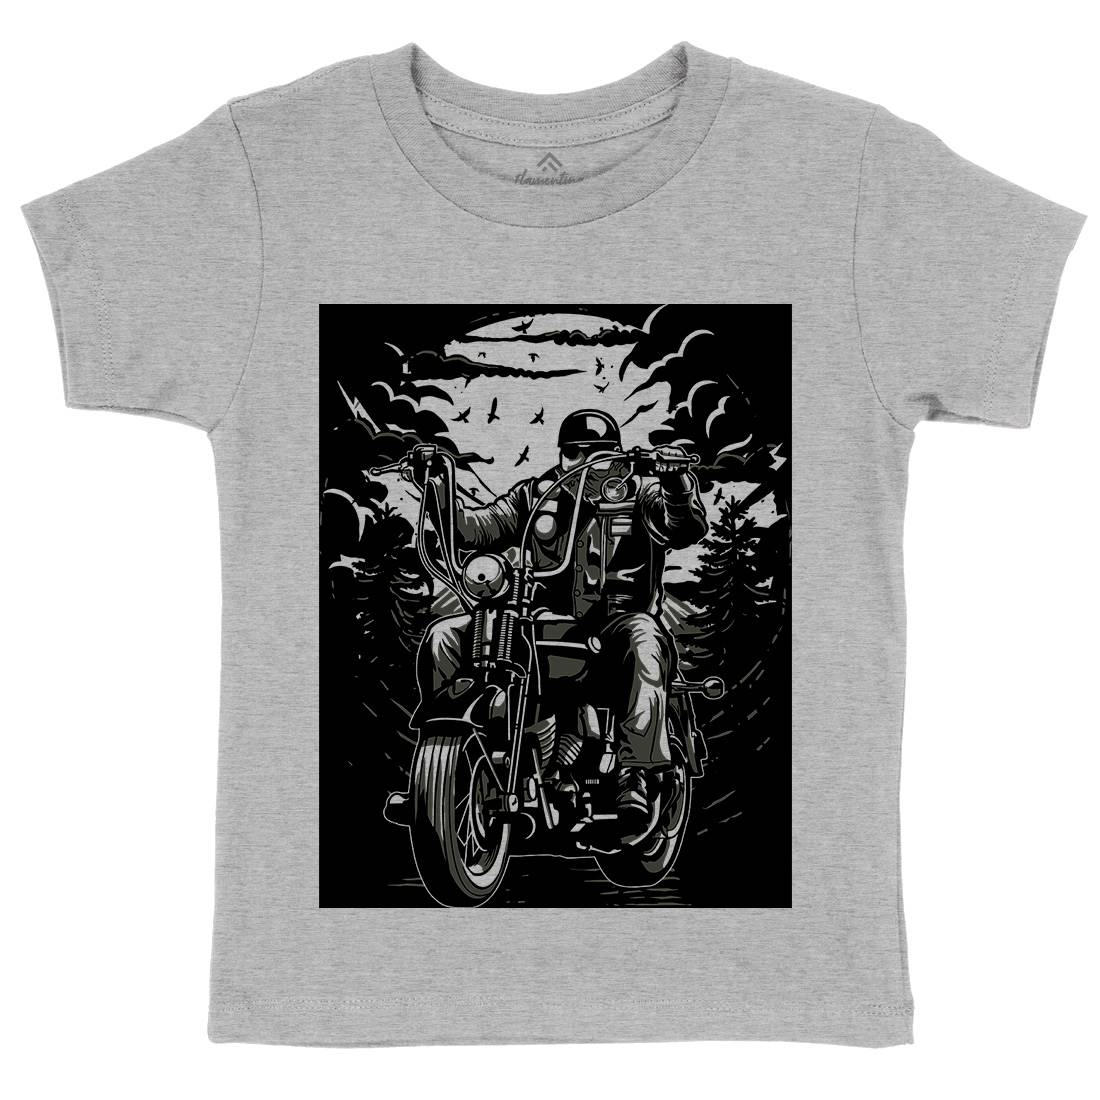 Live To Ride Motorcycle Kids Crew Neck T-Shirt Horror A552